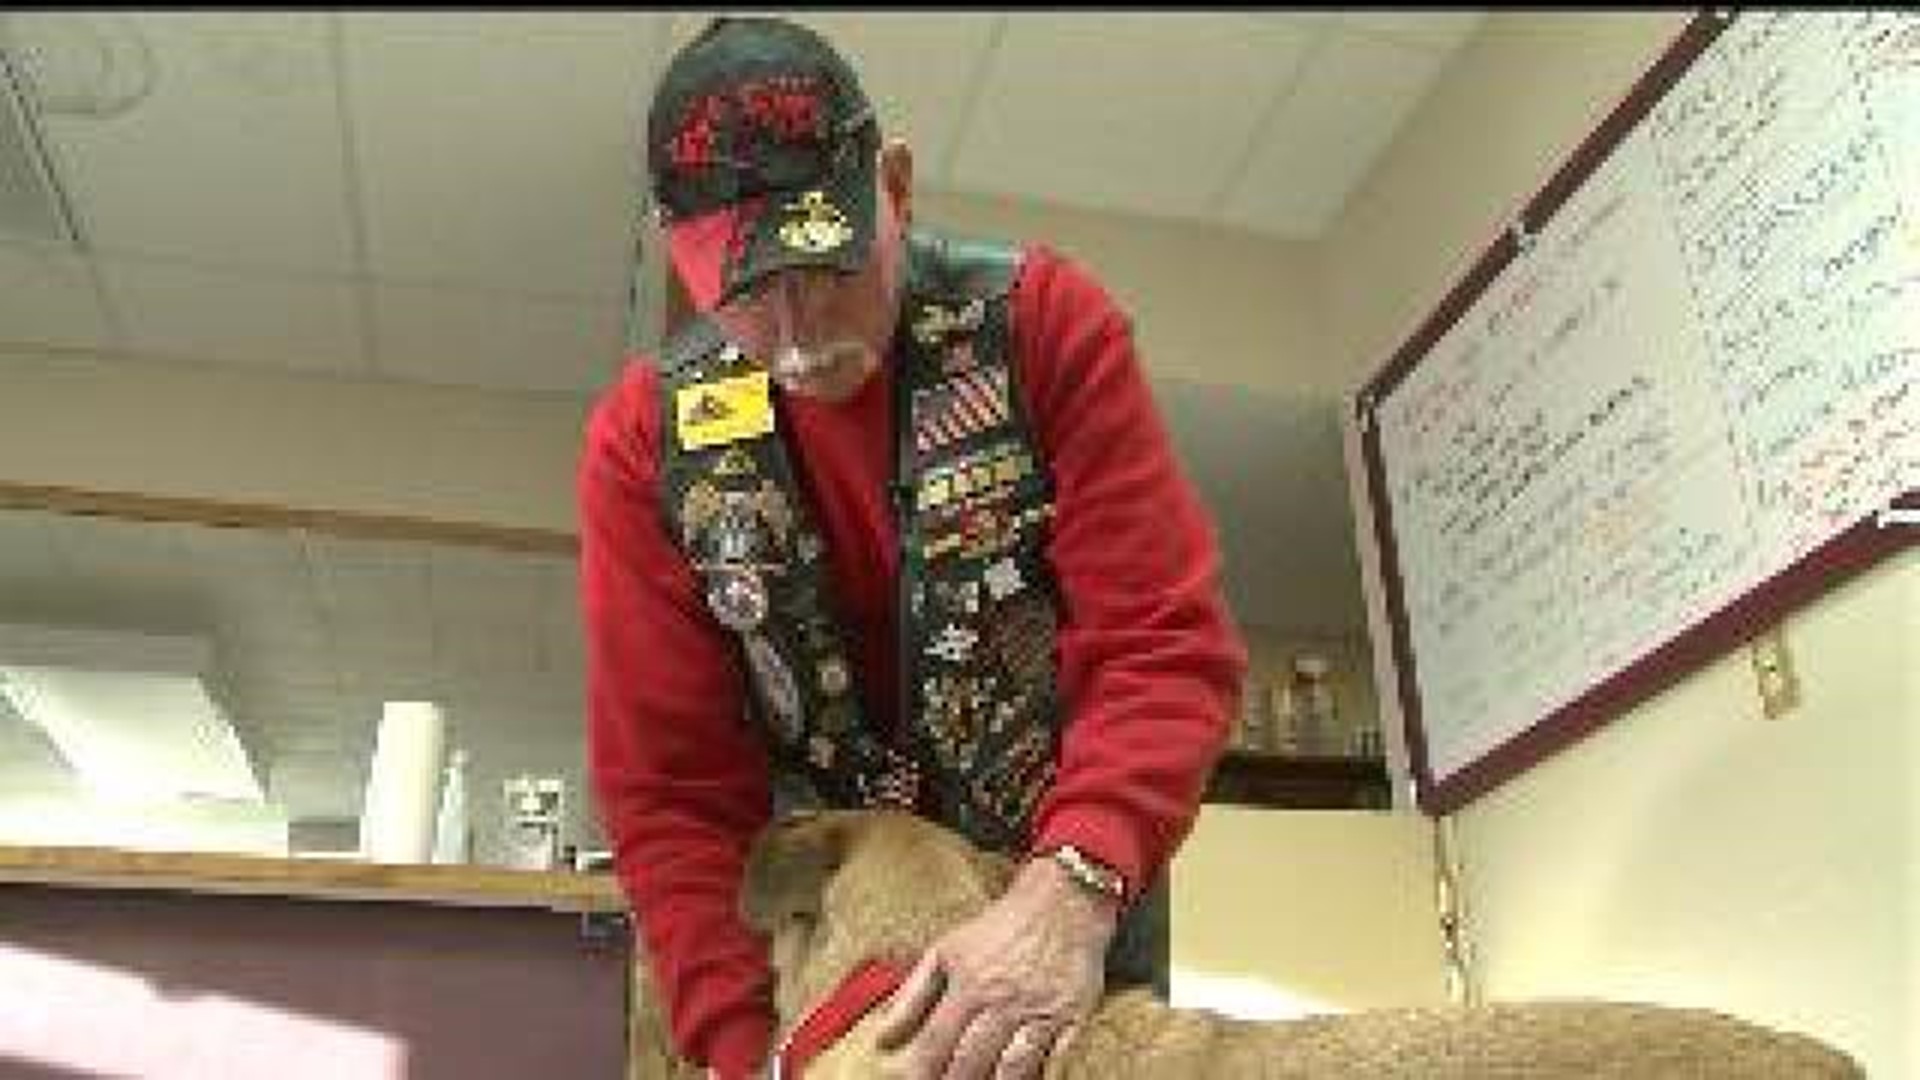 600 miles apart, a veteran and his service dog will be reuinited